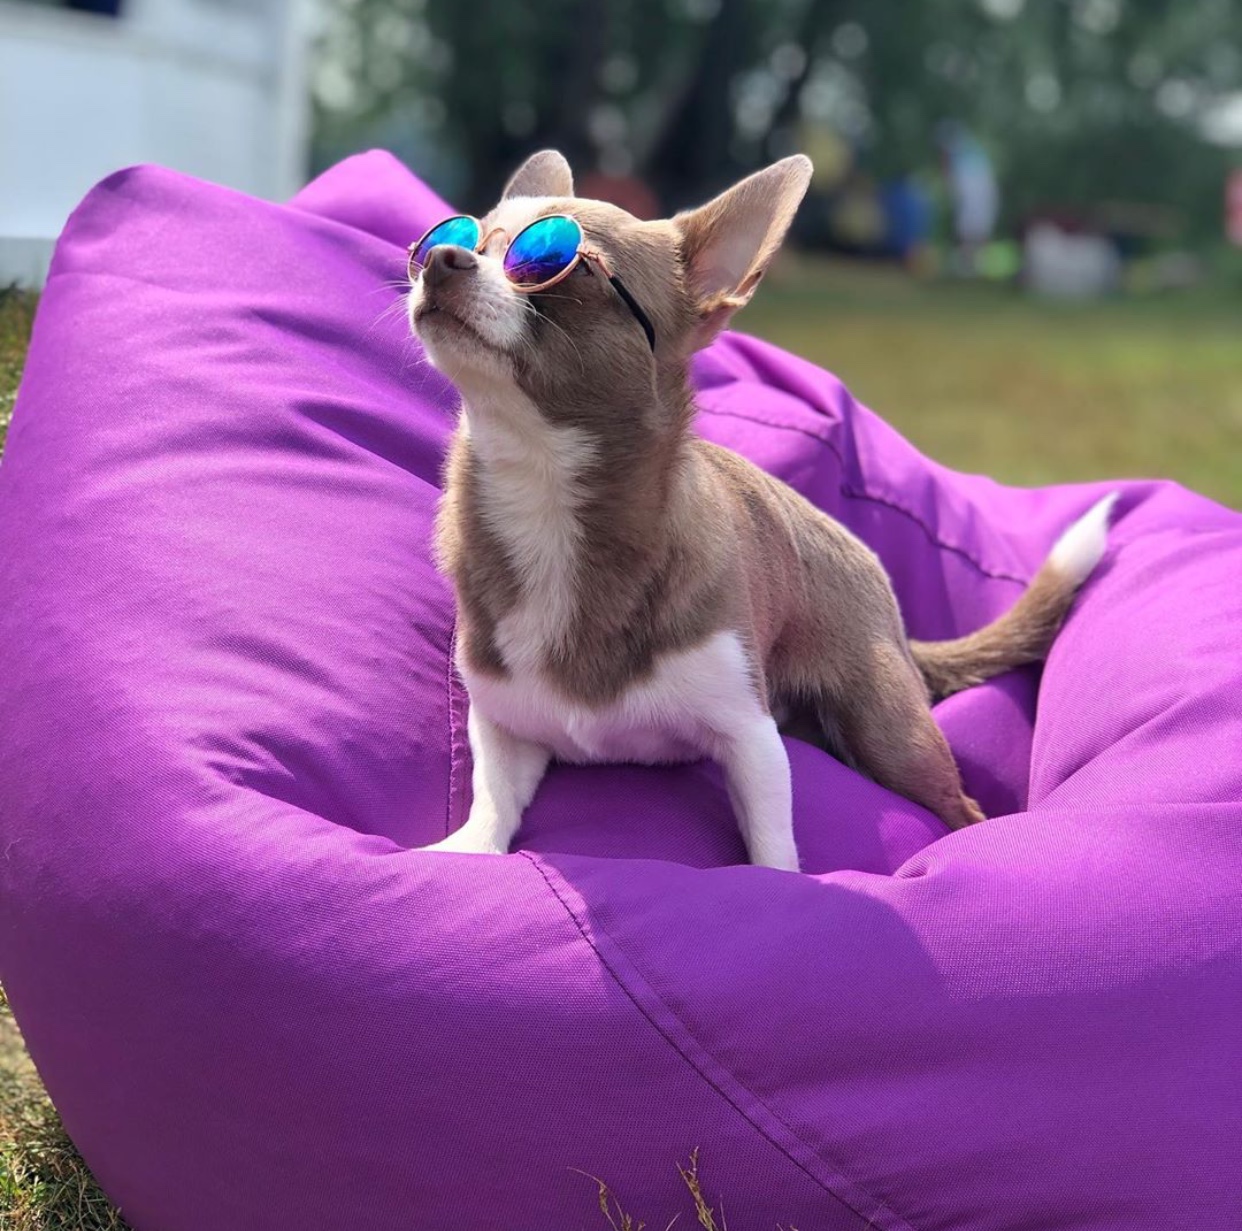 Chihuahua wearing sunglasses while looking up the sky